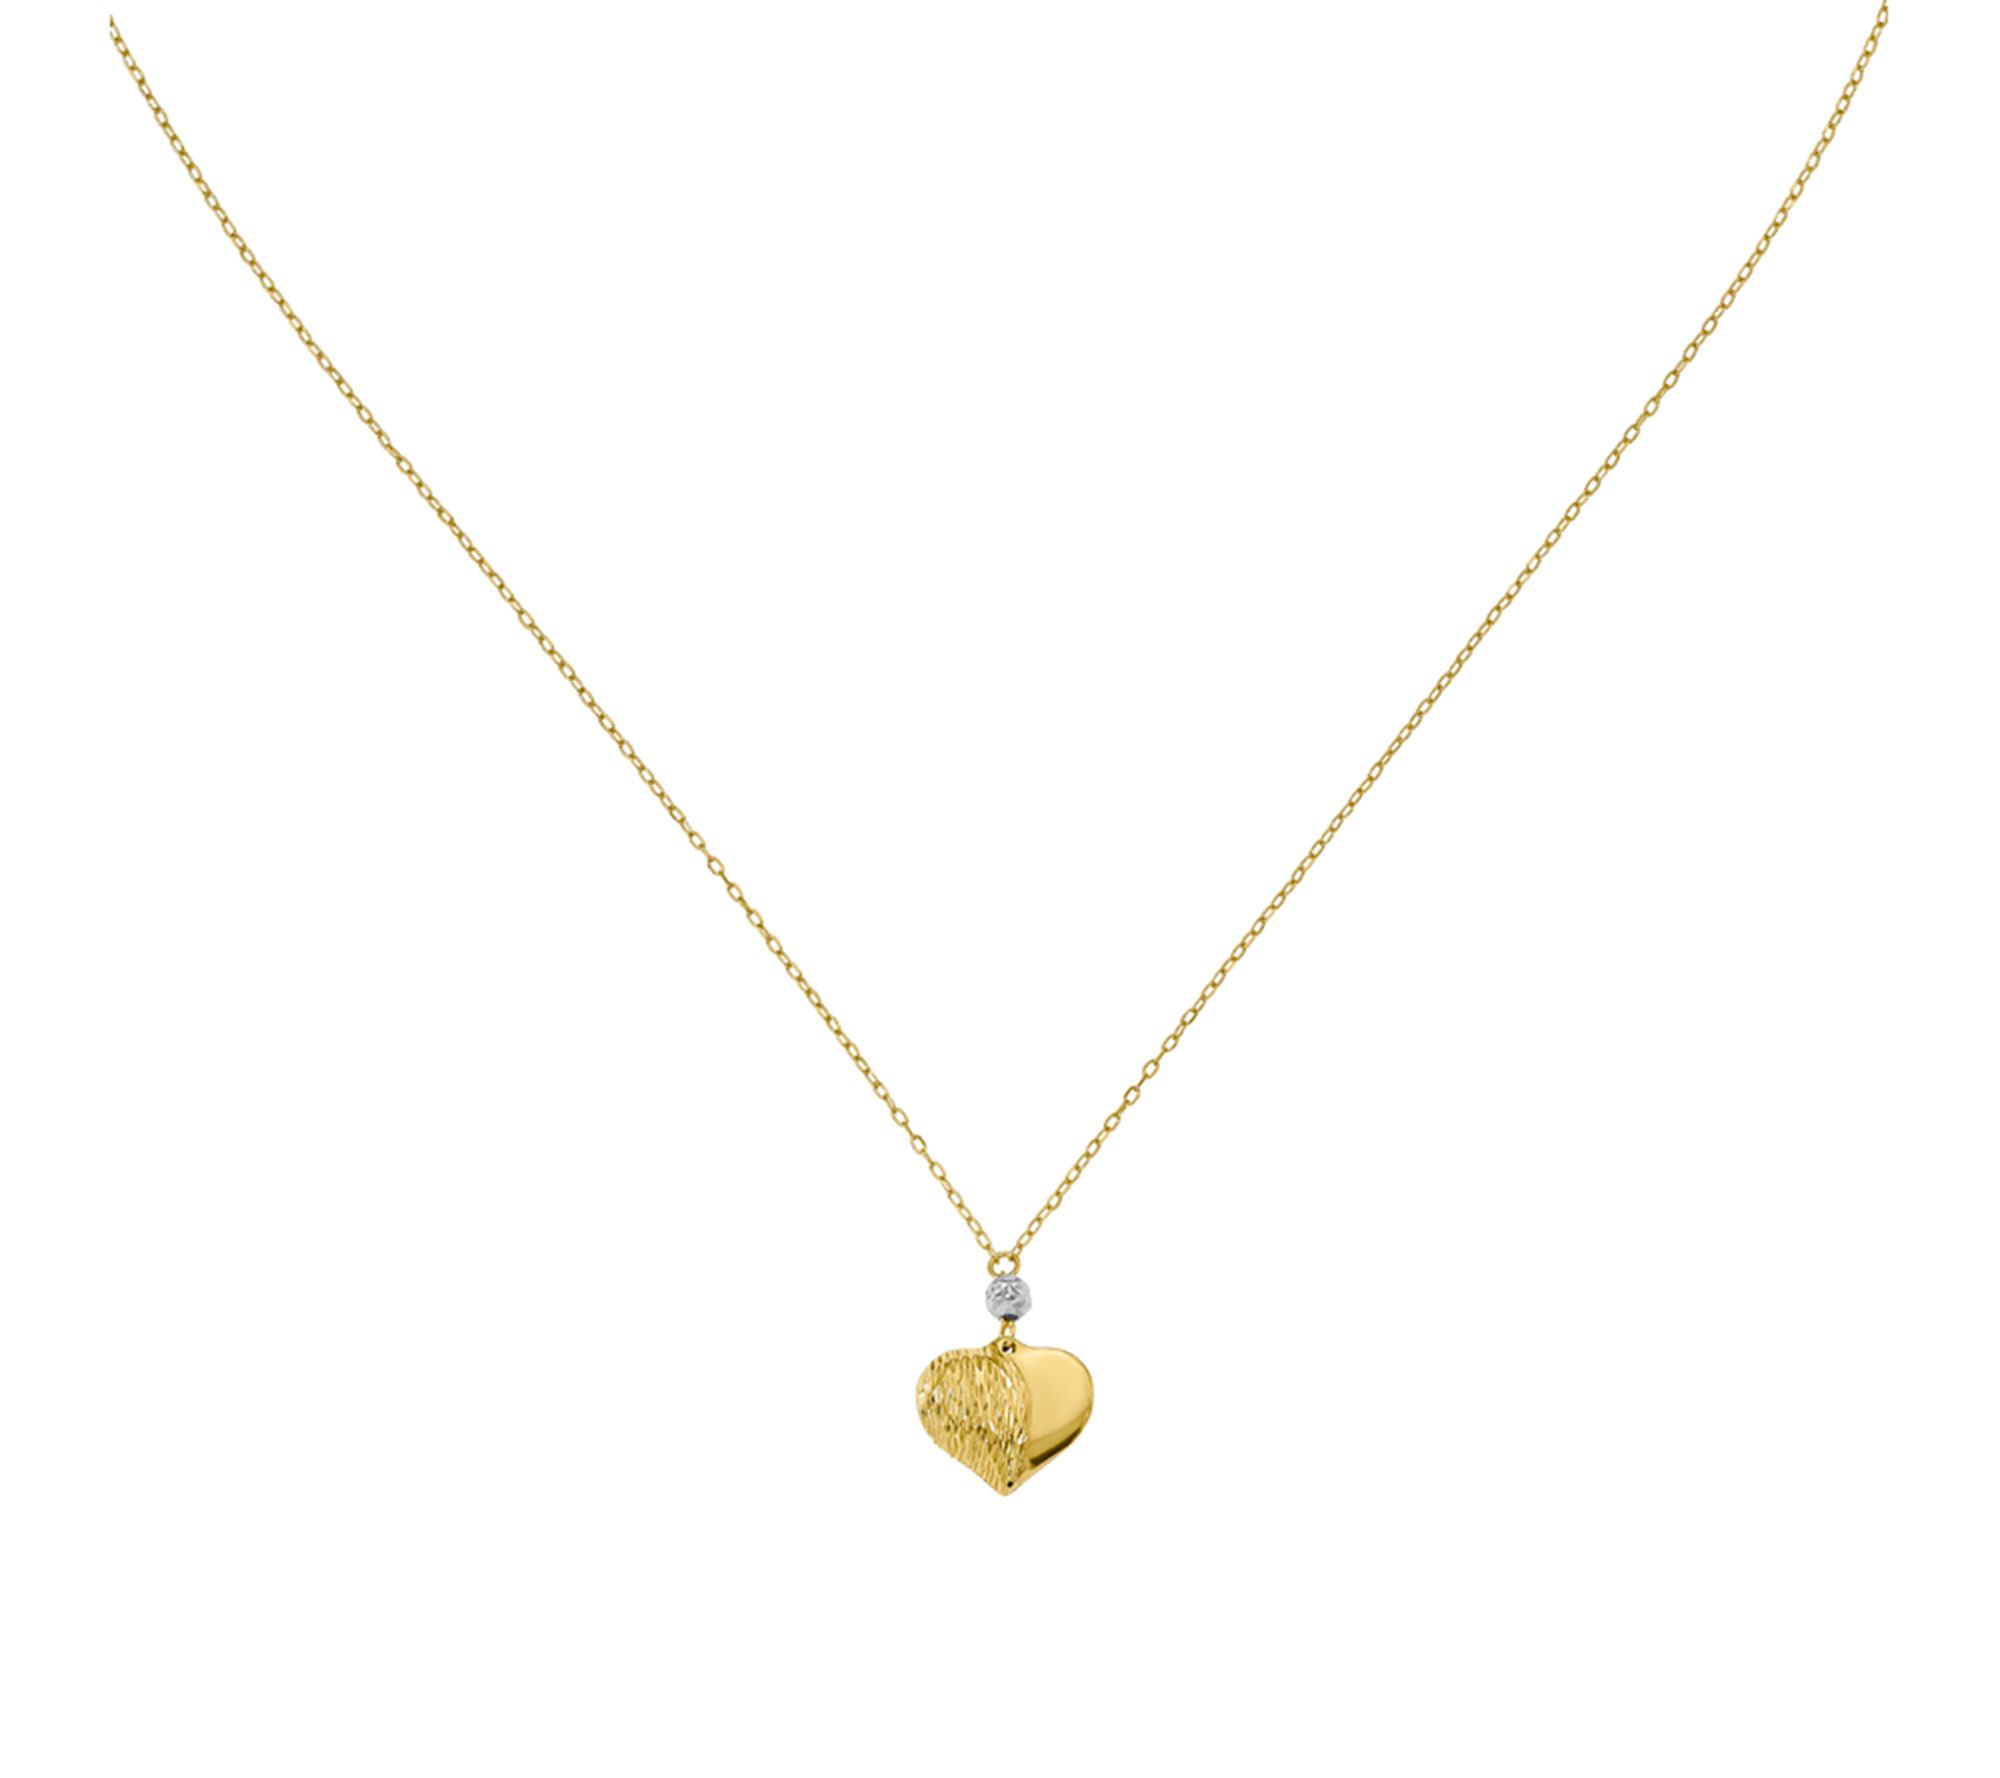 14K Gold Two-Tone Puffed Heart Necklace, 1.2g - QVC.com